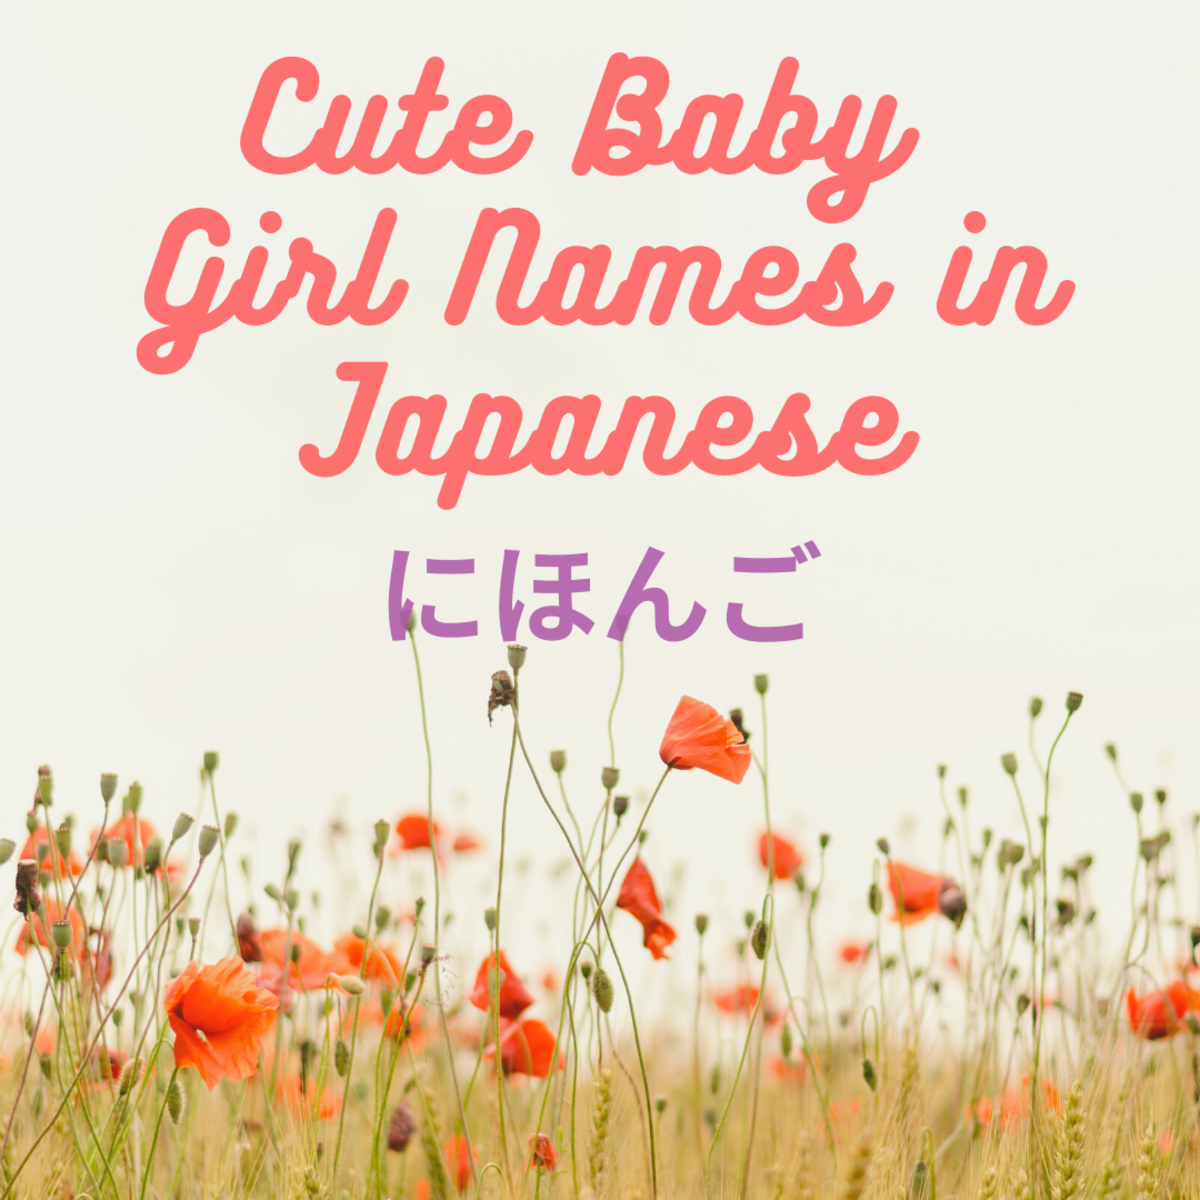 Read on to find over 100 beautiful Japanese girl names